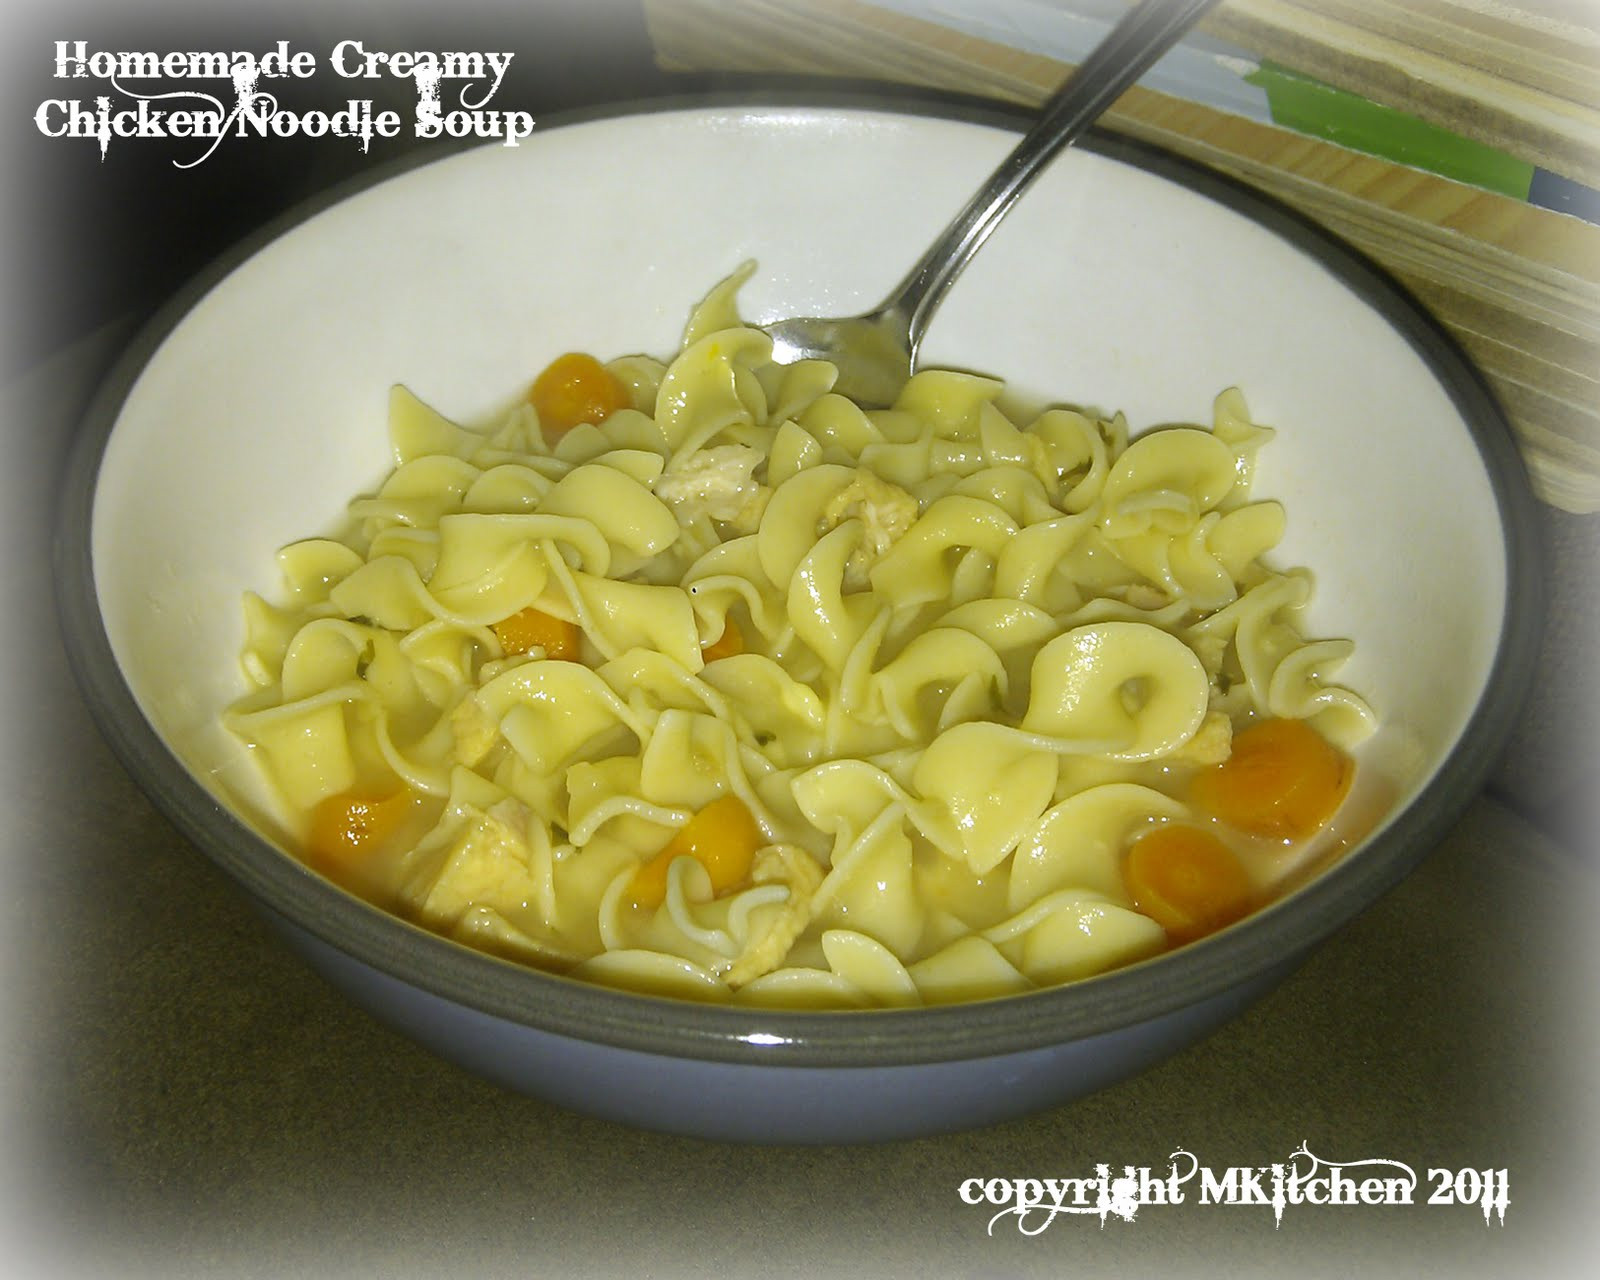 Homemade Creamy Chicken Noodle Soup
 A Stampage Homemade Creamy Chicken Noodle Soup